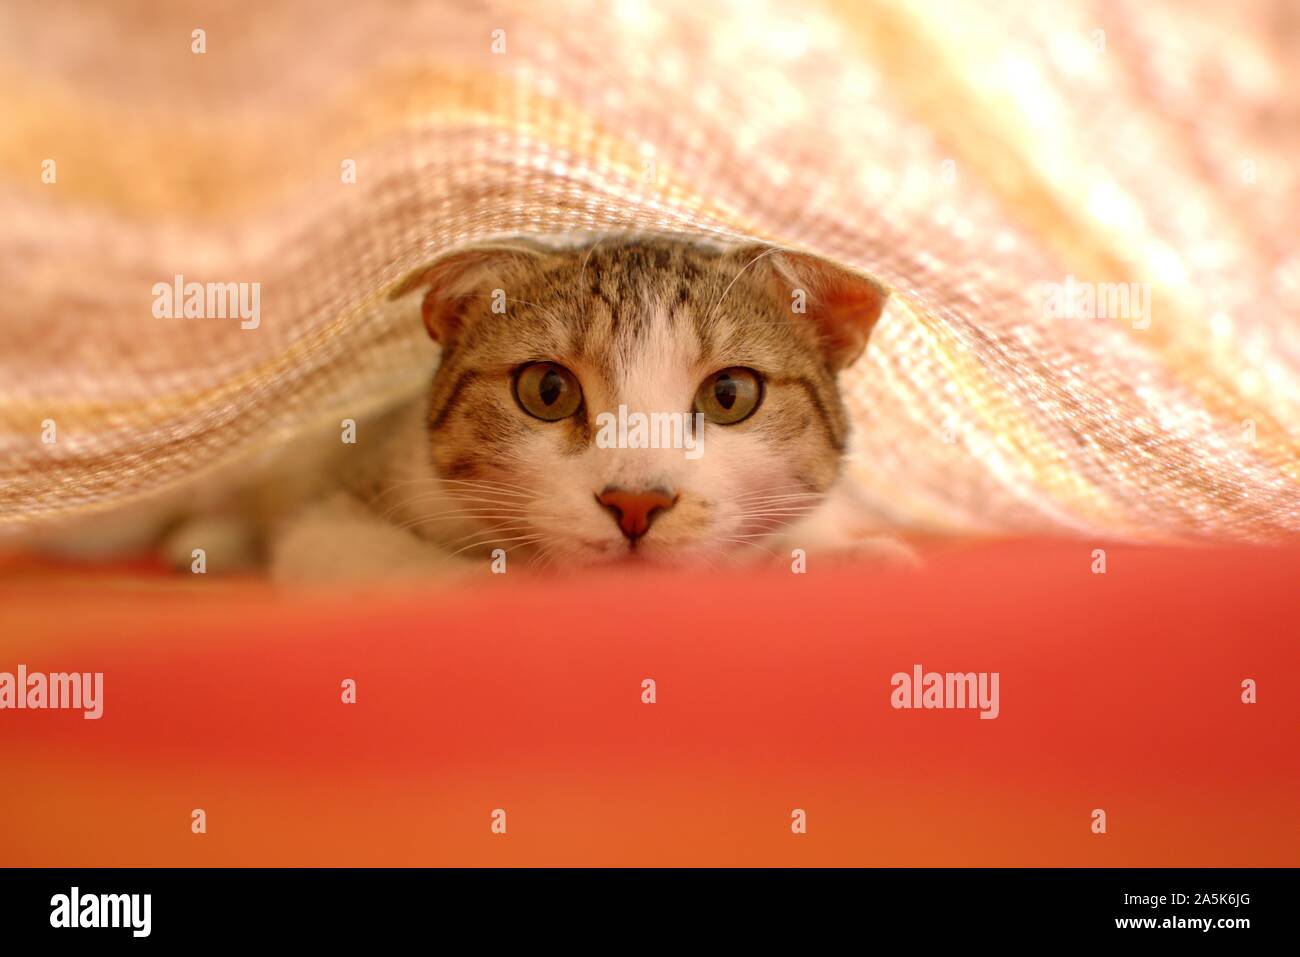 Young tabby cat playing hunt under the blankets on bed. Stock Photo